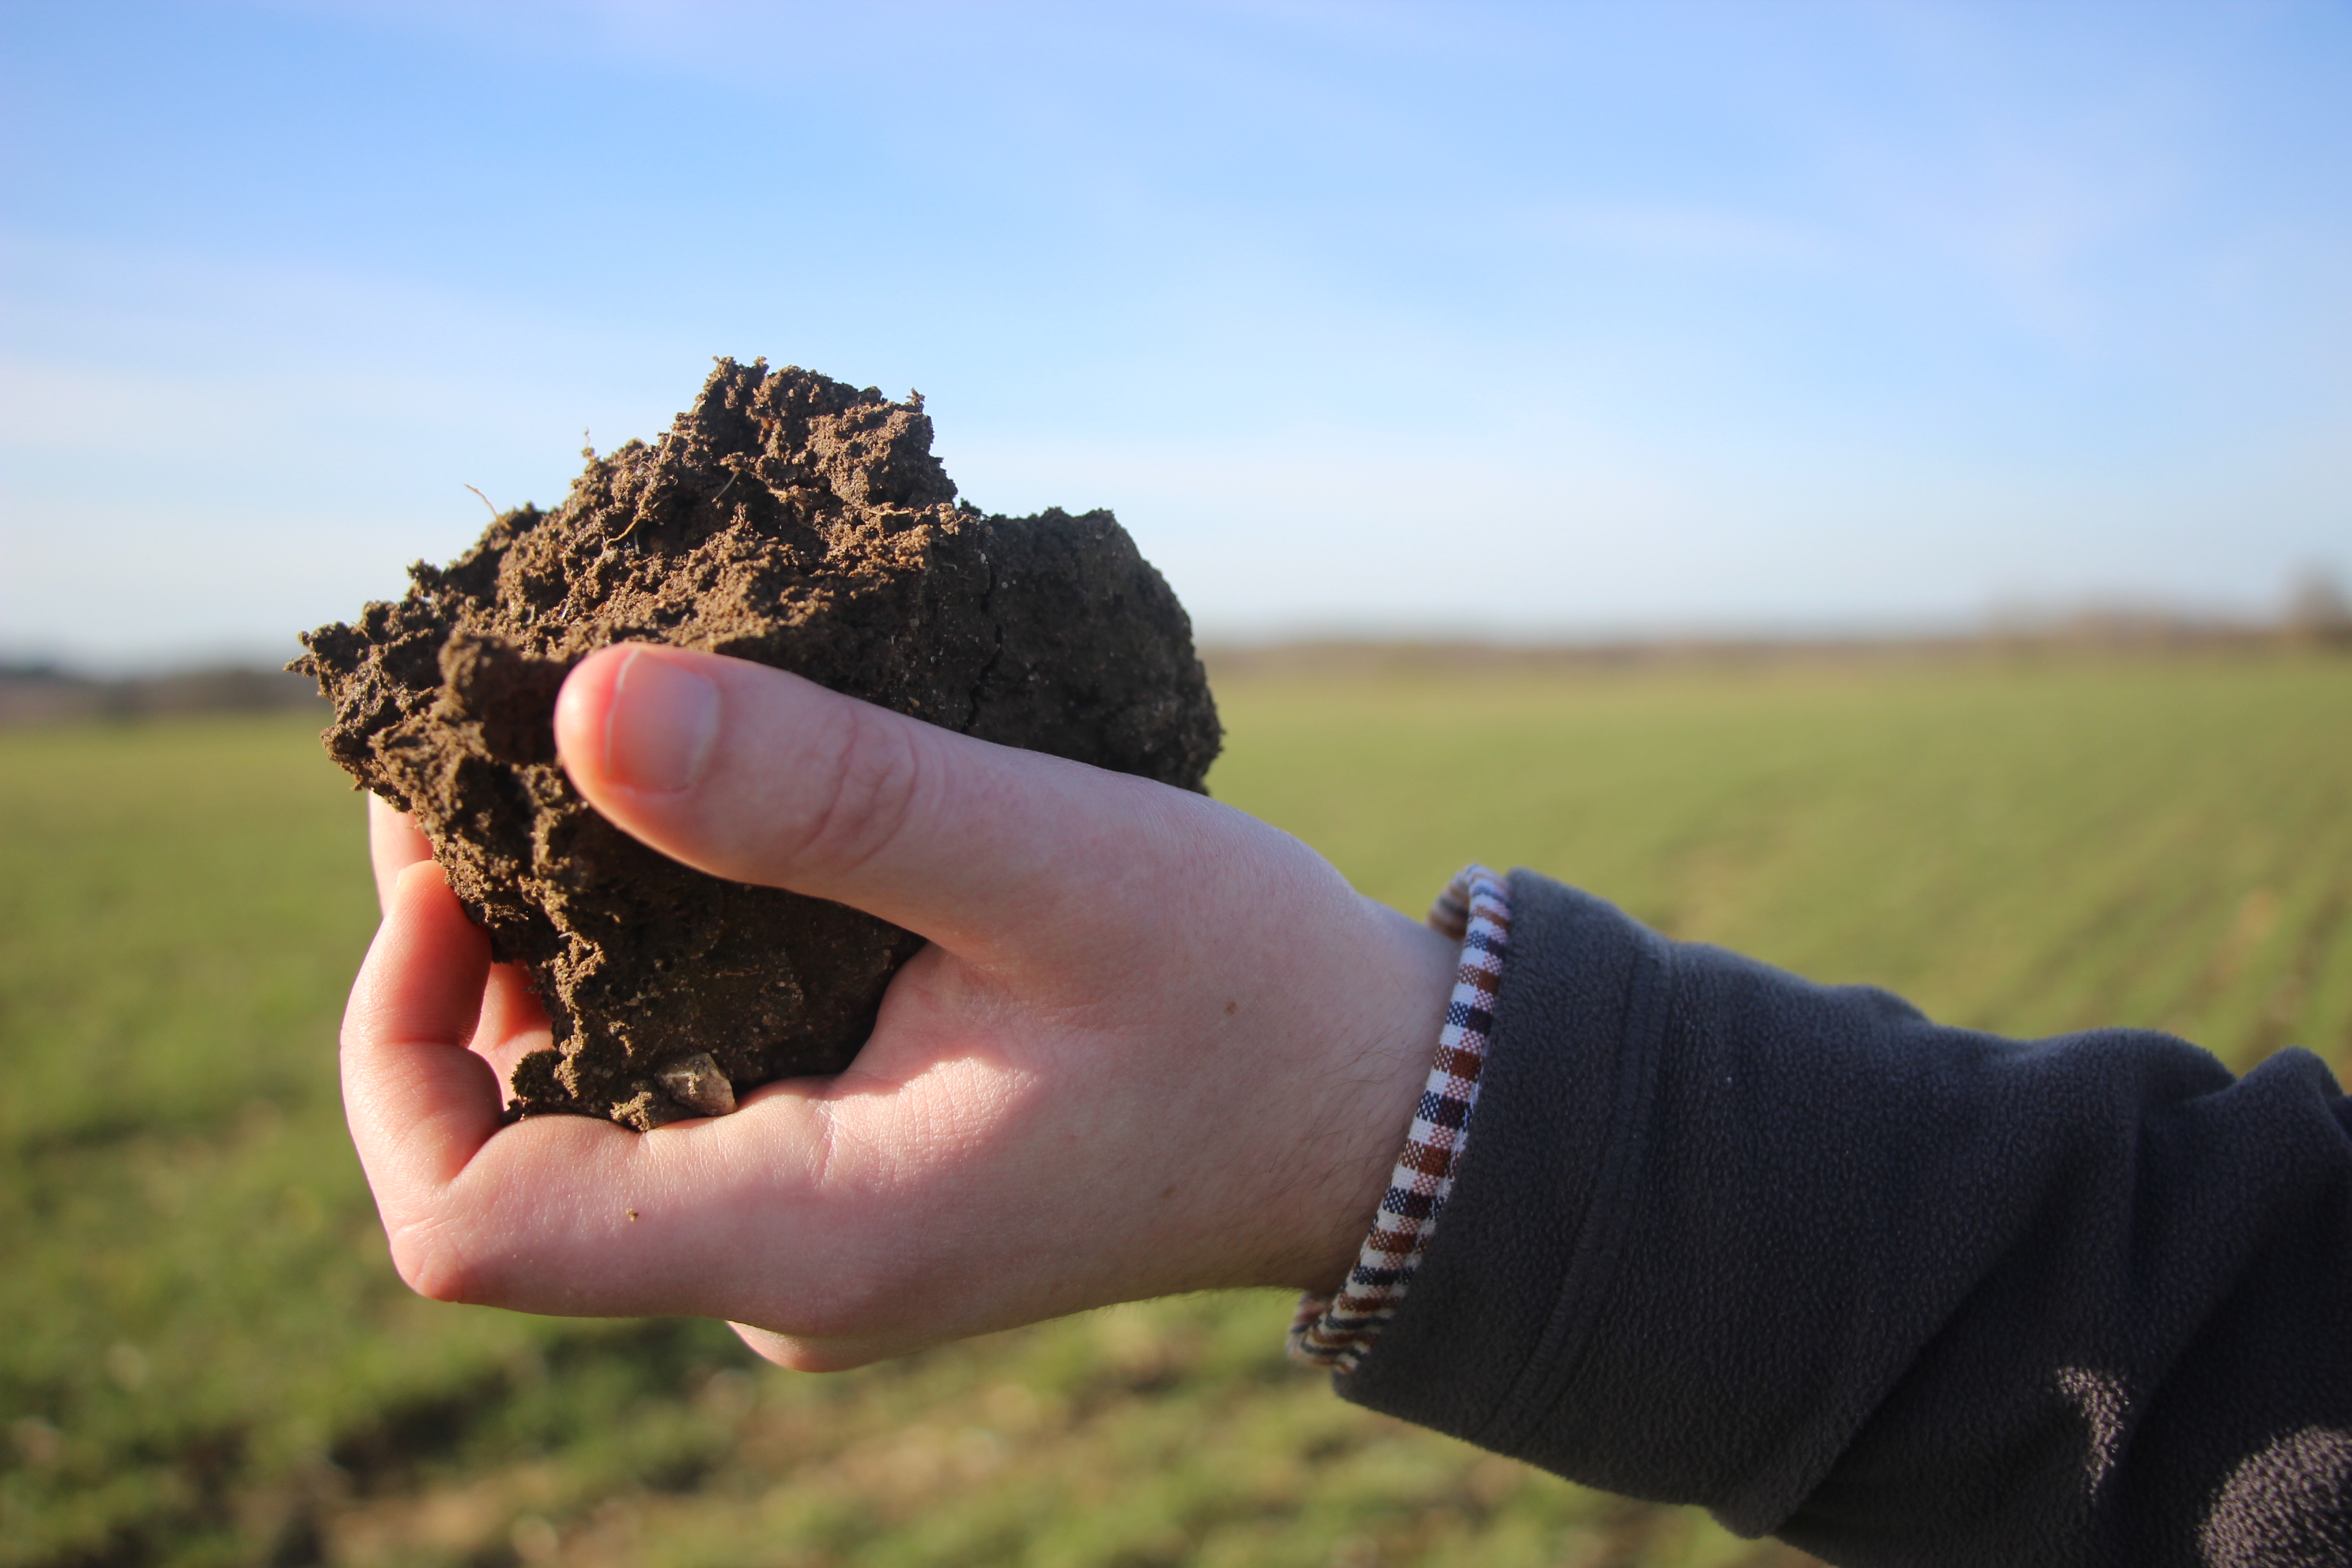 A hand holding a lump of soil